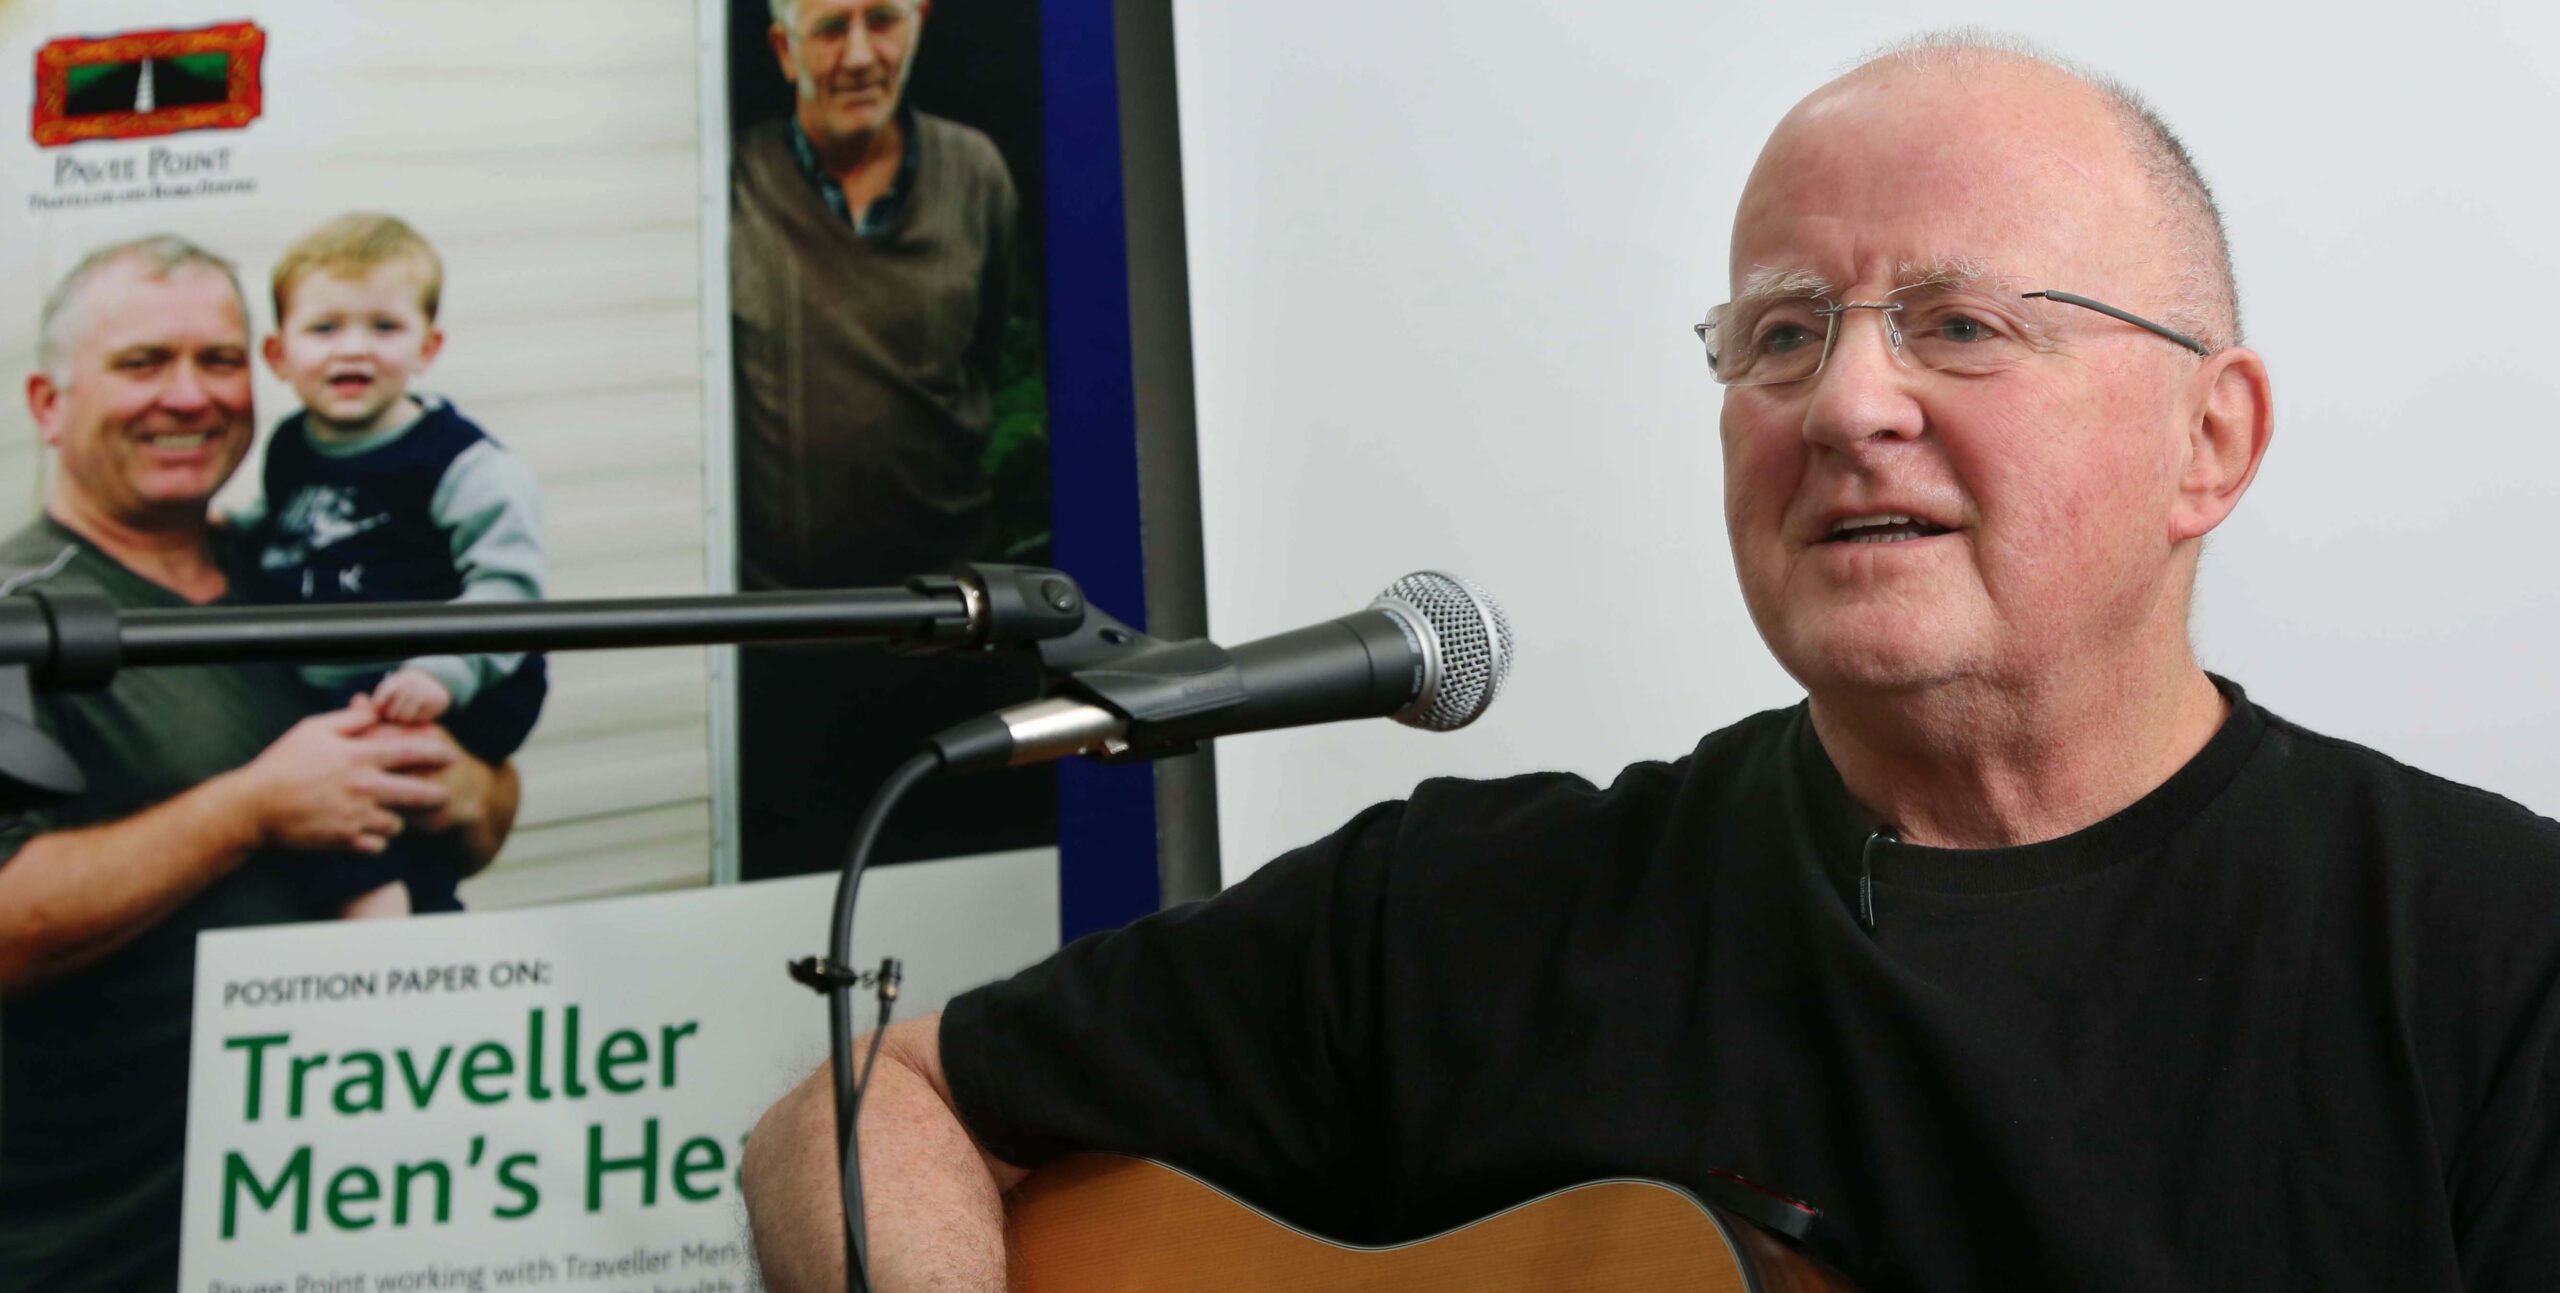 Christy Moore and Bressie back calls for targeted action on Traveller Men’s Health